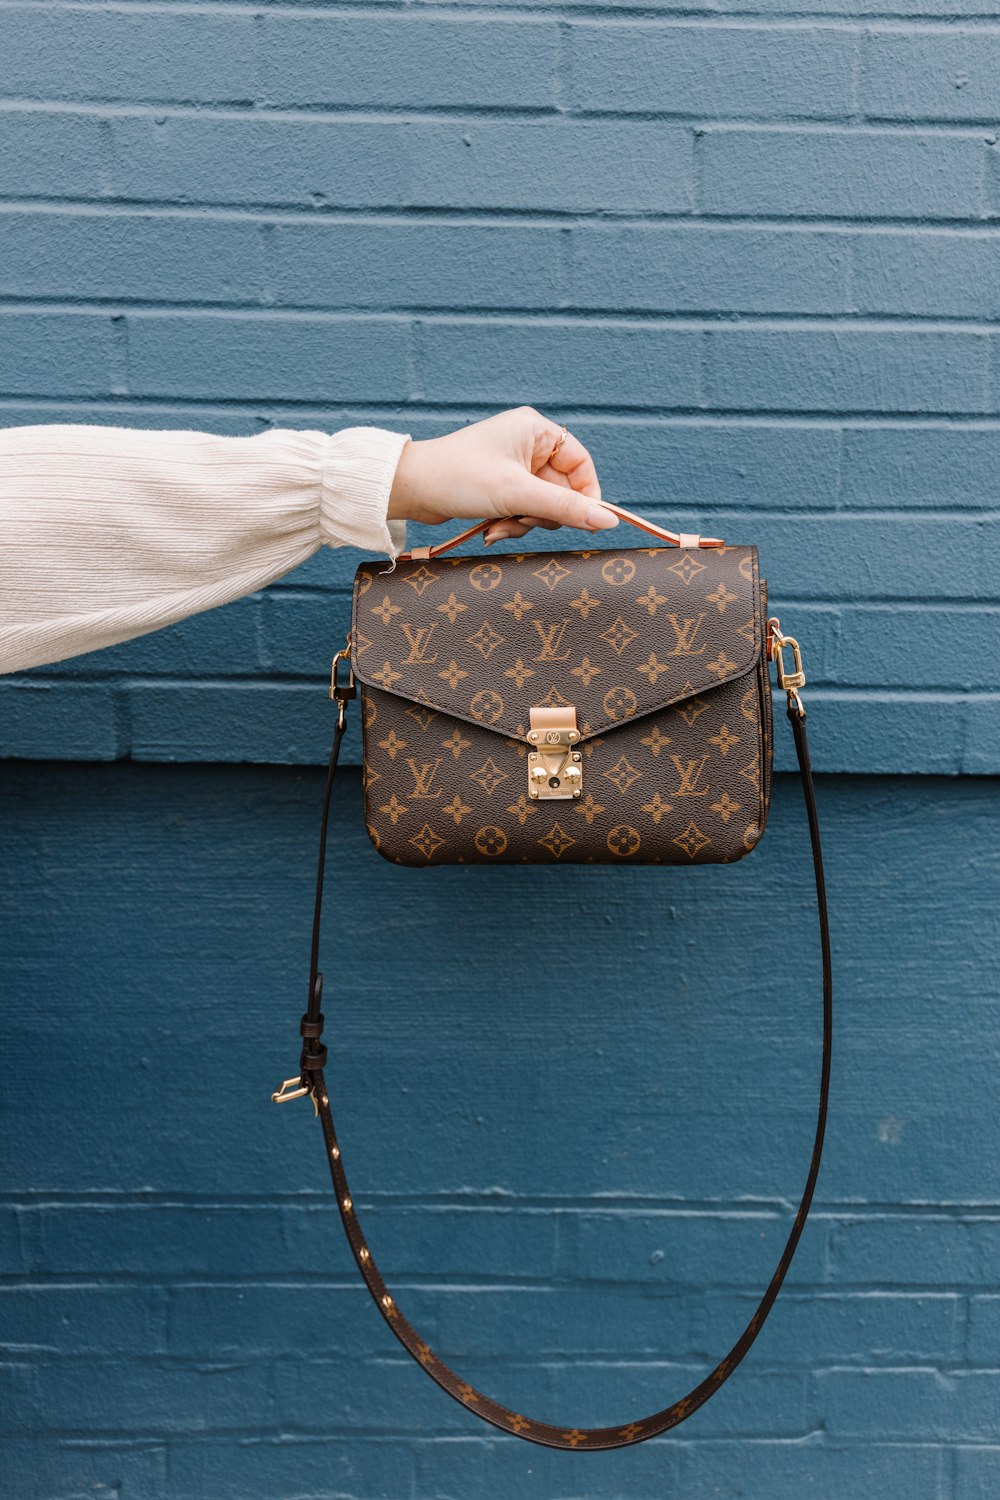 Revolutionize Your Louis Vuitton Bag With These Easy-peasy Tips - literacybasics.ca